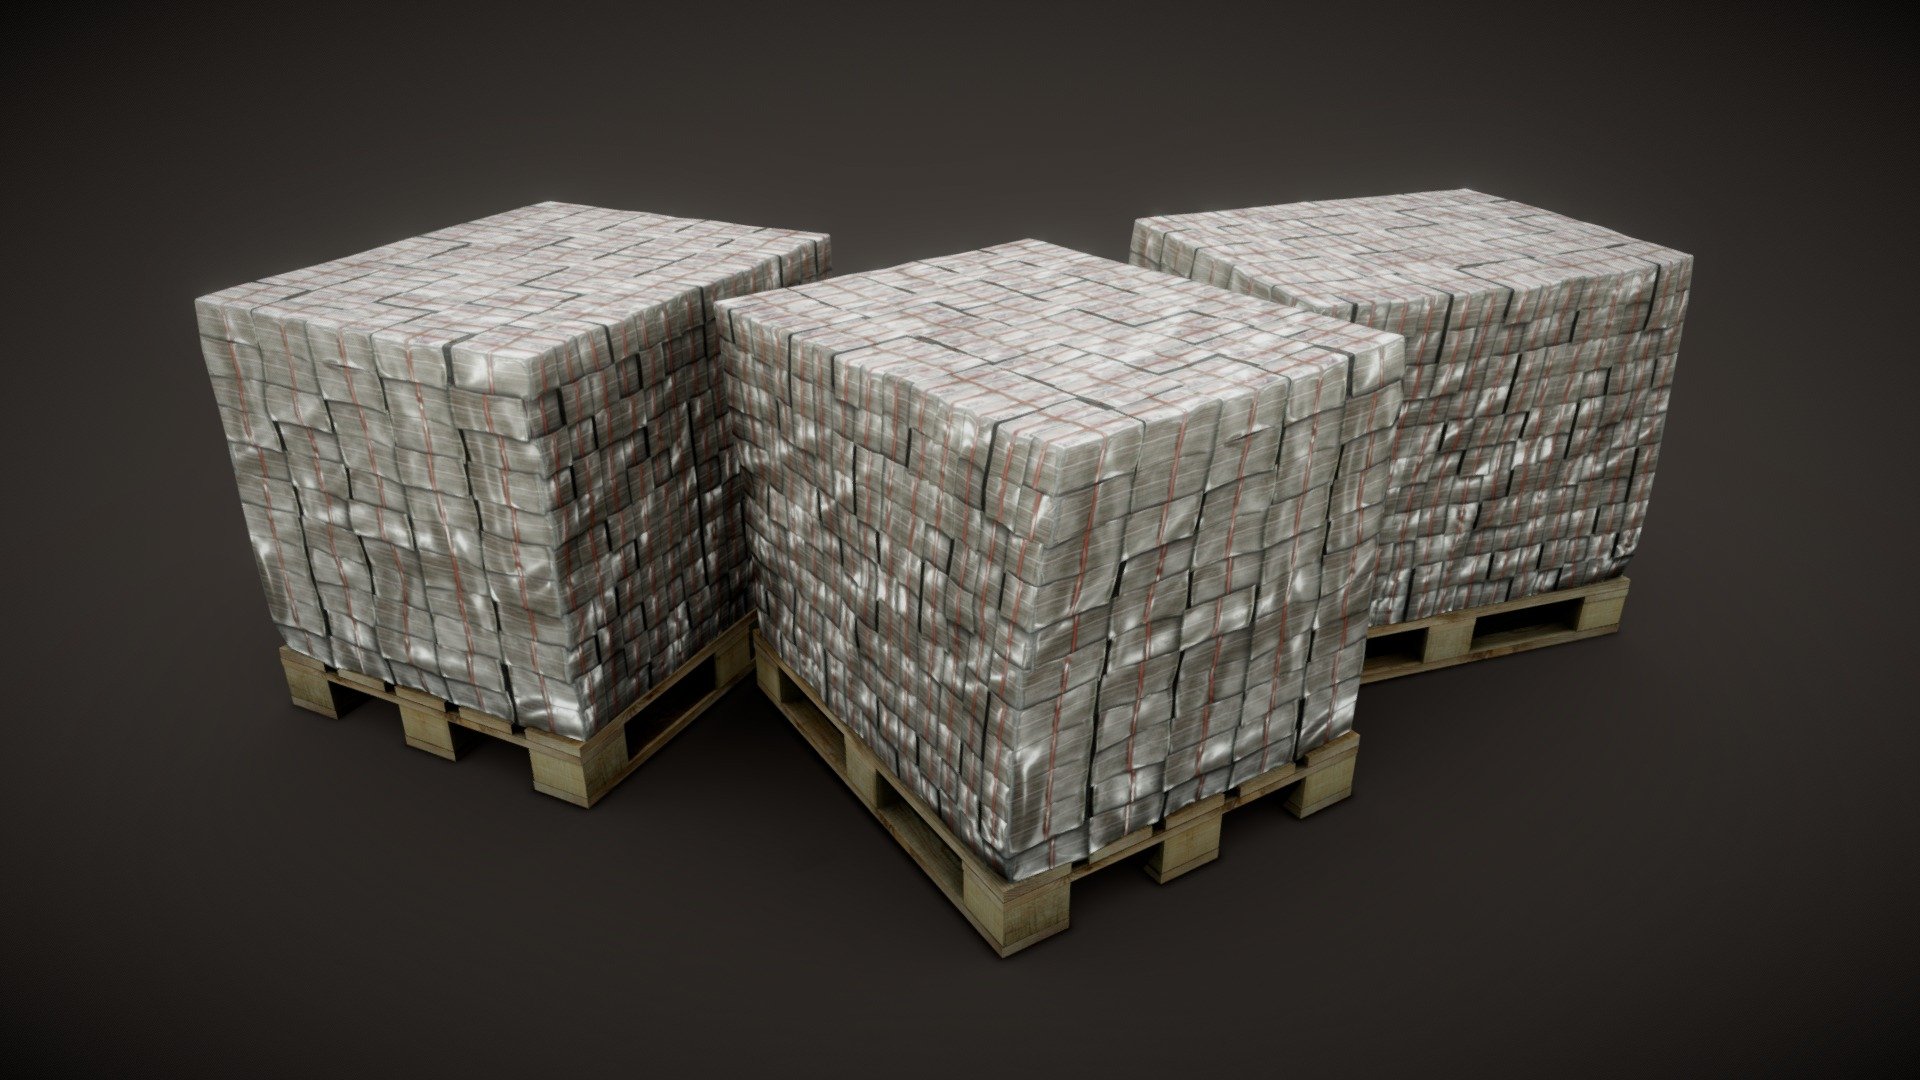 Lighting and environment are simulated on texture, not PBR.
It's a work I do for fun so It has no purpose. :-) - Pallet of Money - 3D model by bertanbaday 3d model